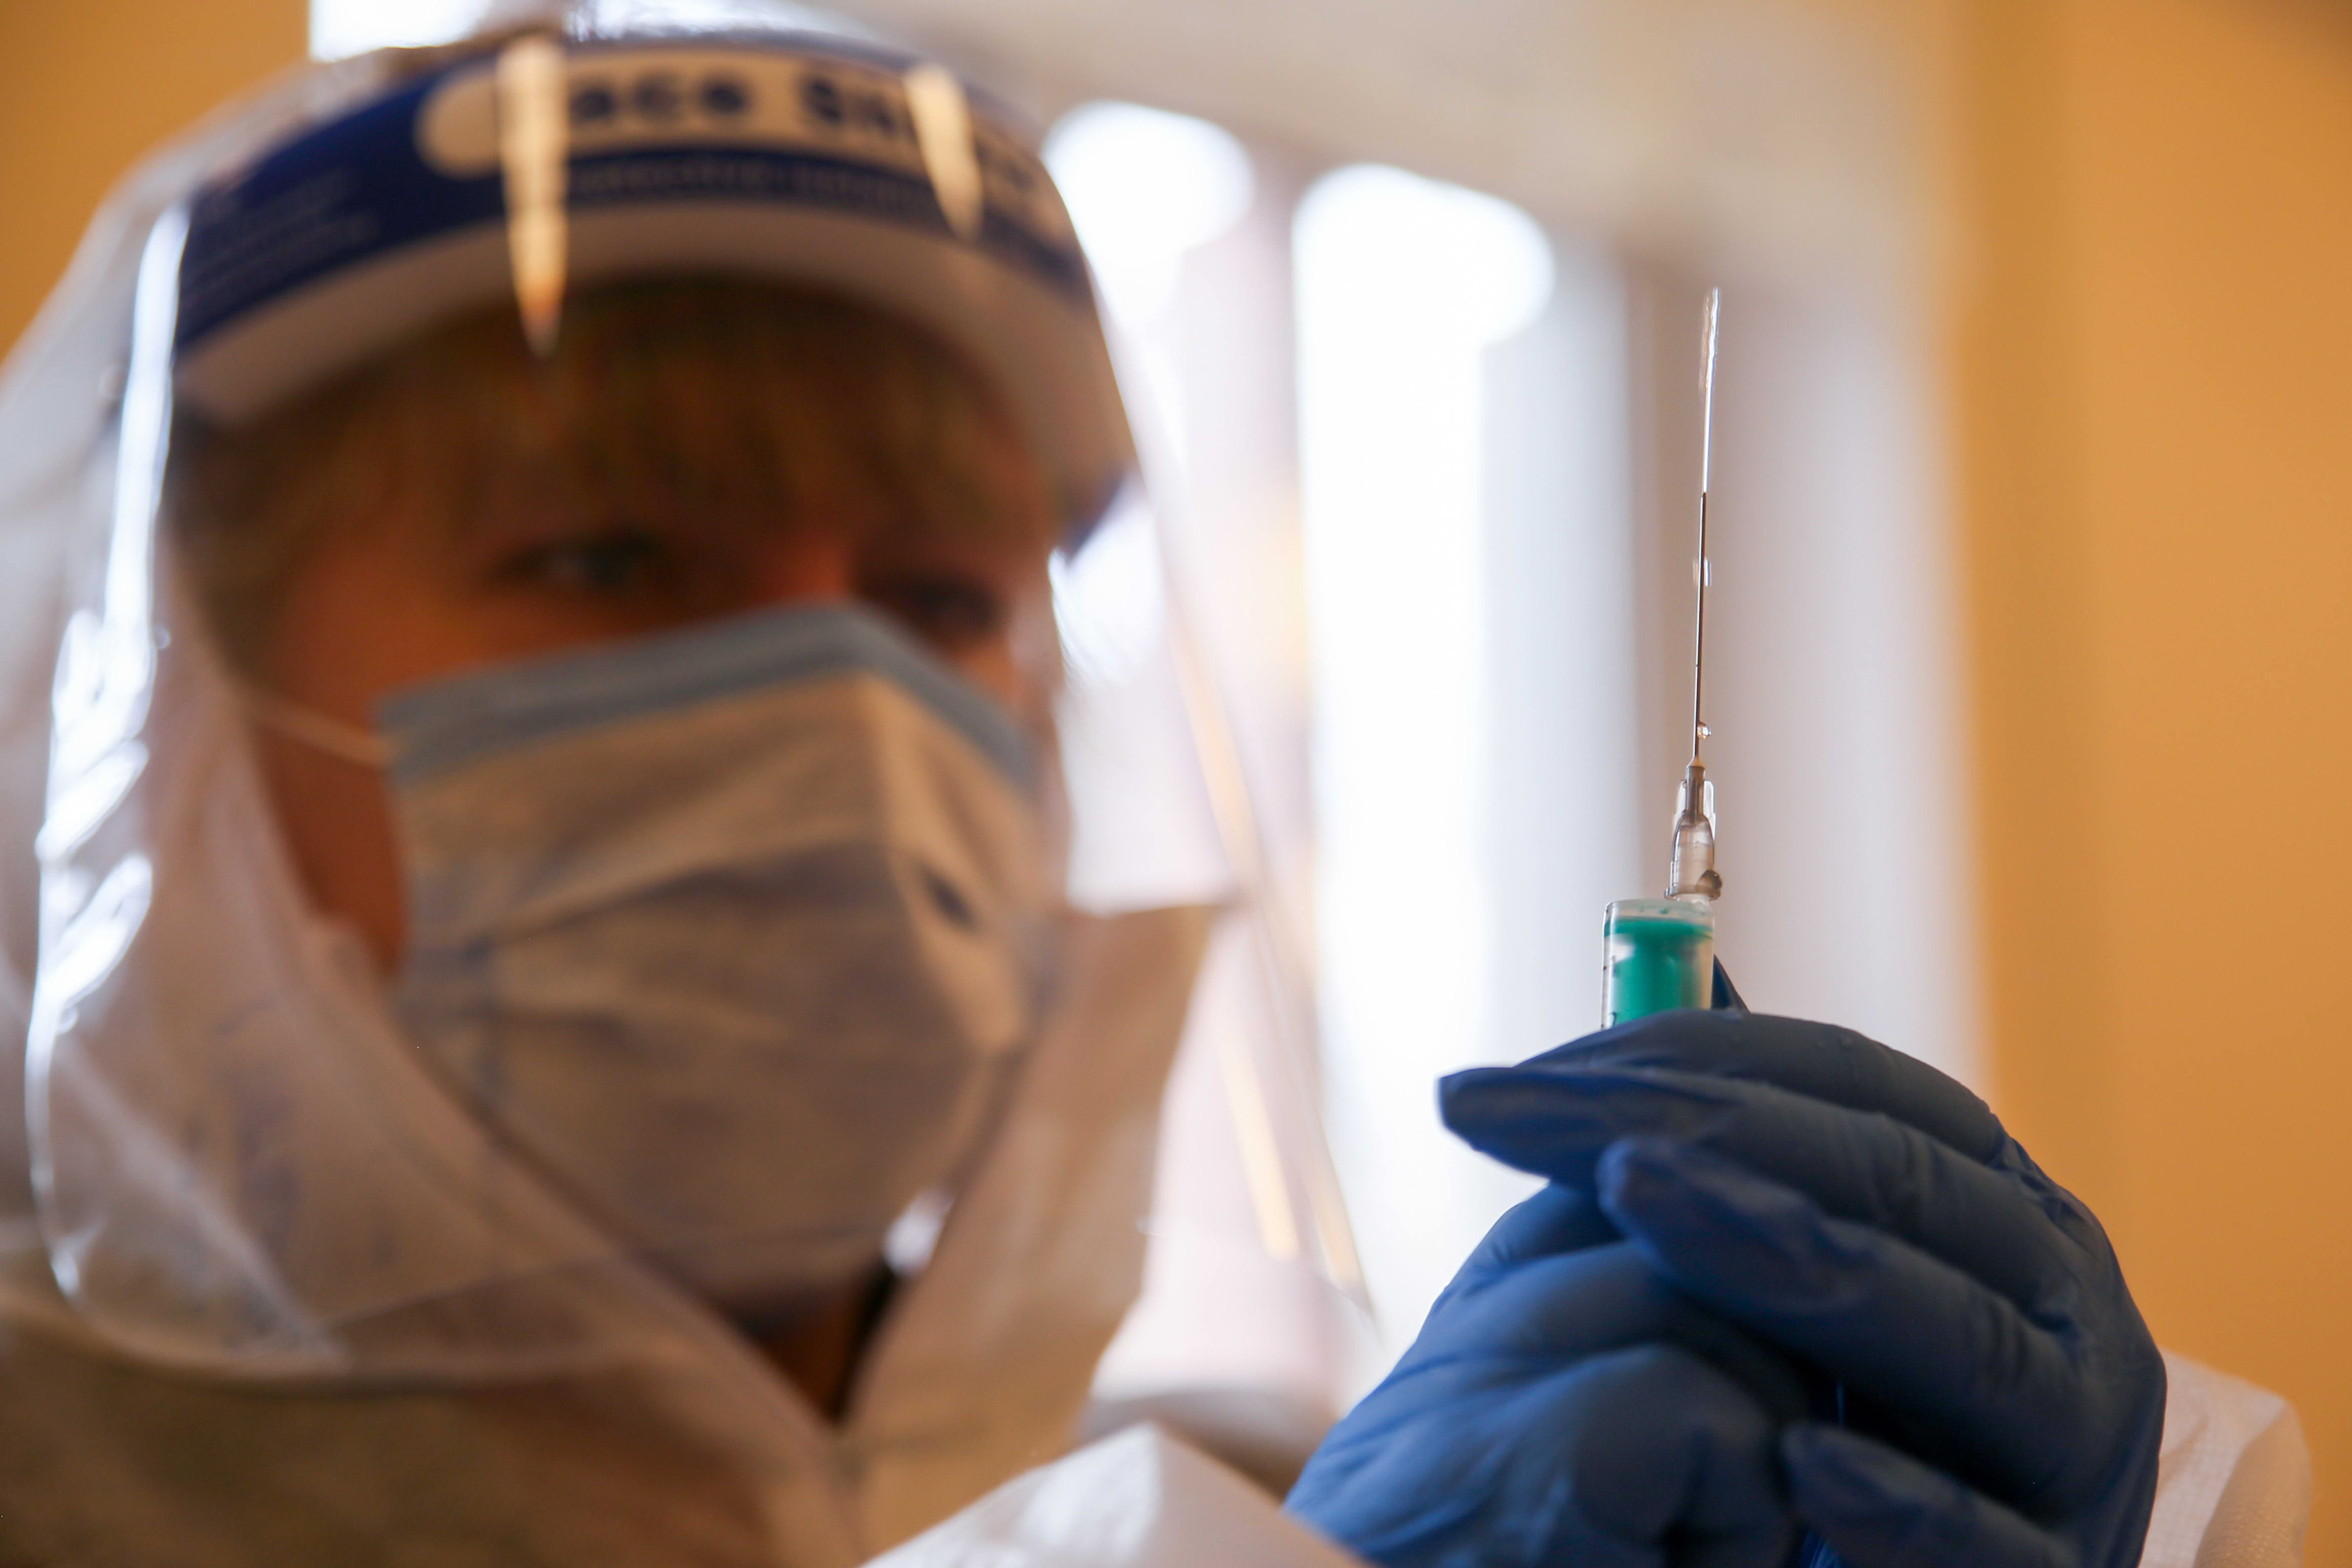 Europe should be open to Russia's Sputnik V shot amid 'Pfizer monopoly,' vaccine backer says